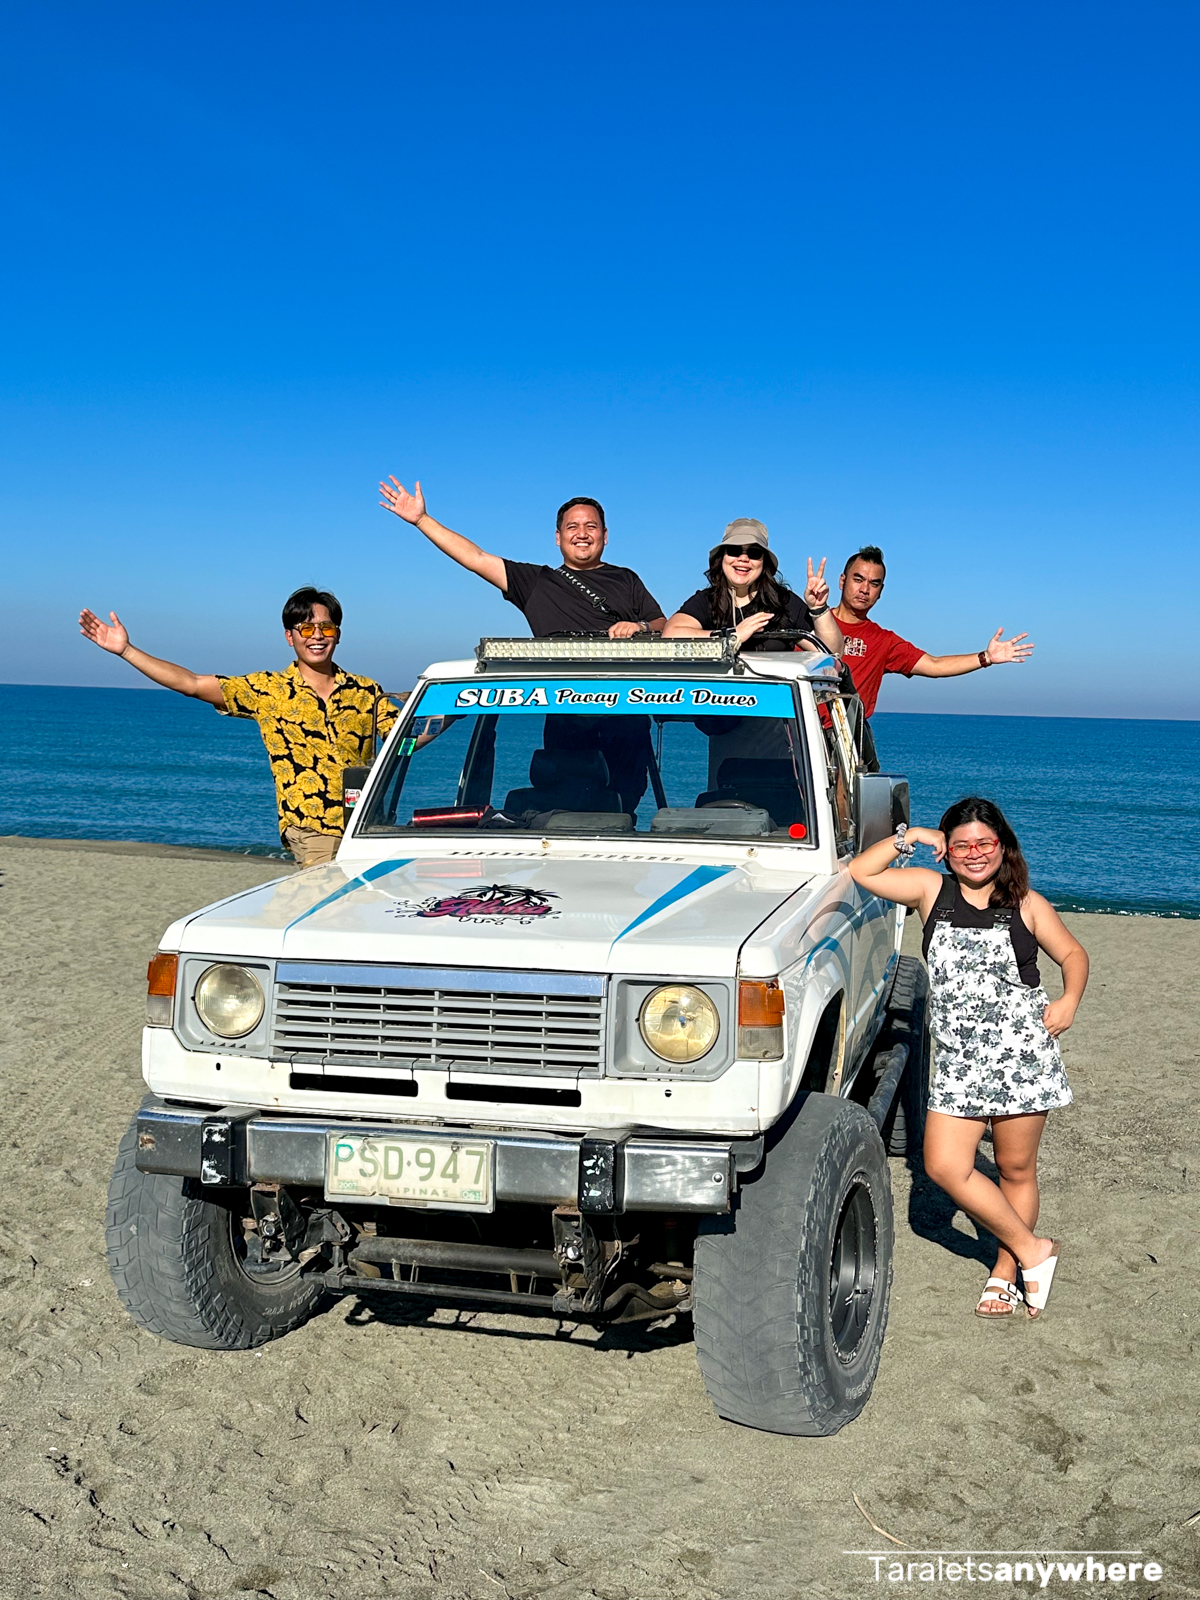 Group photo in Paoay Sand Dunes